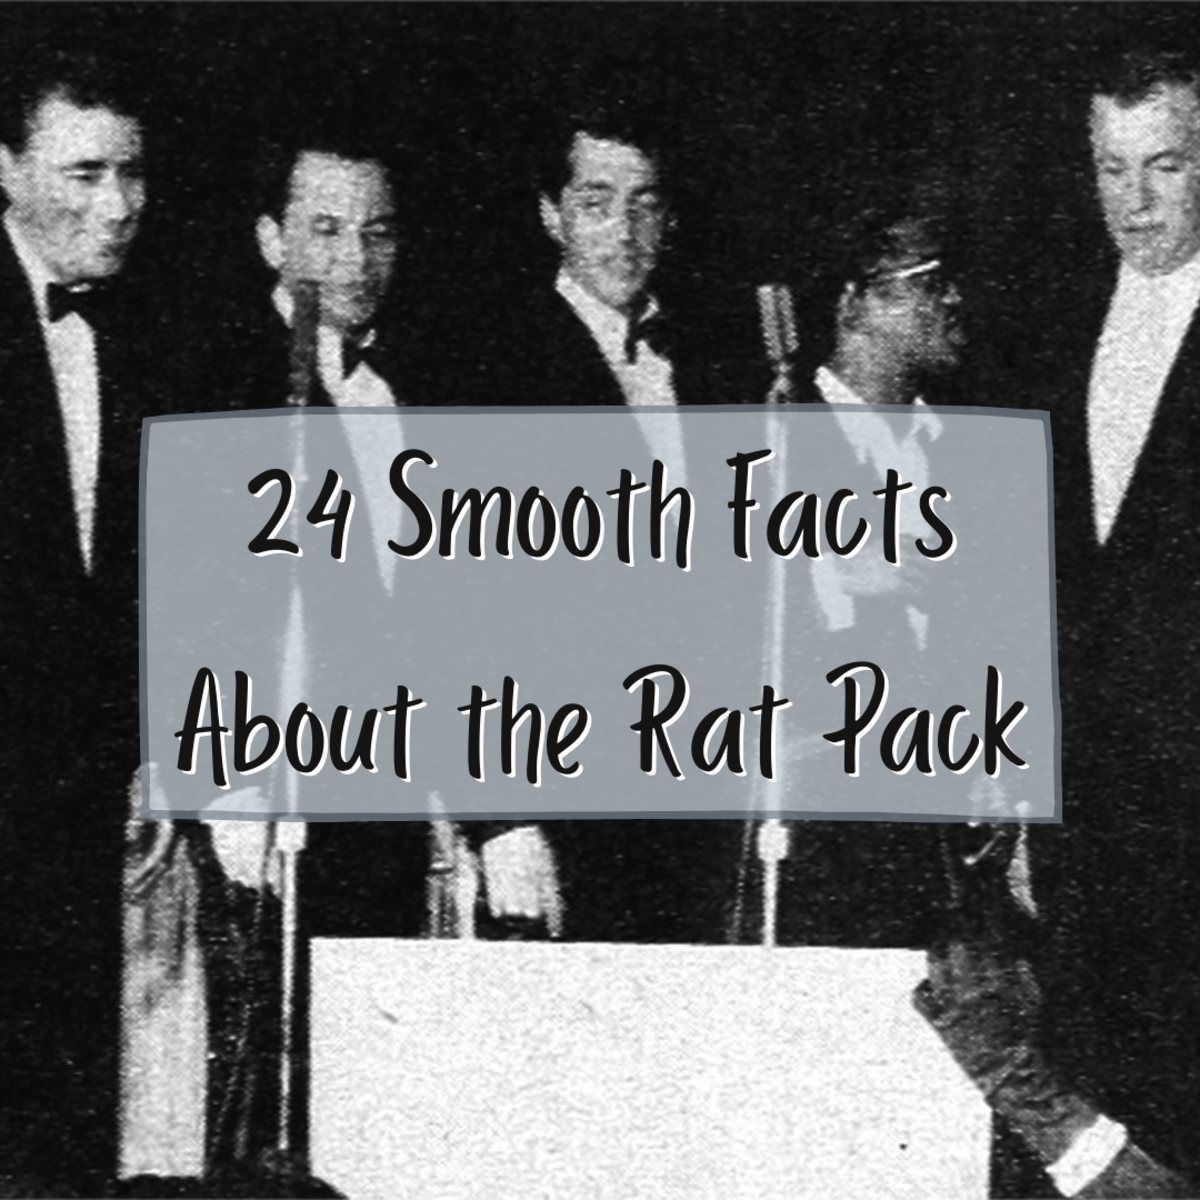 Read on to learn 24 facts about the Rat Pack, the group that defined "cool" in the 1960s.